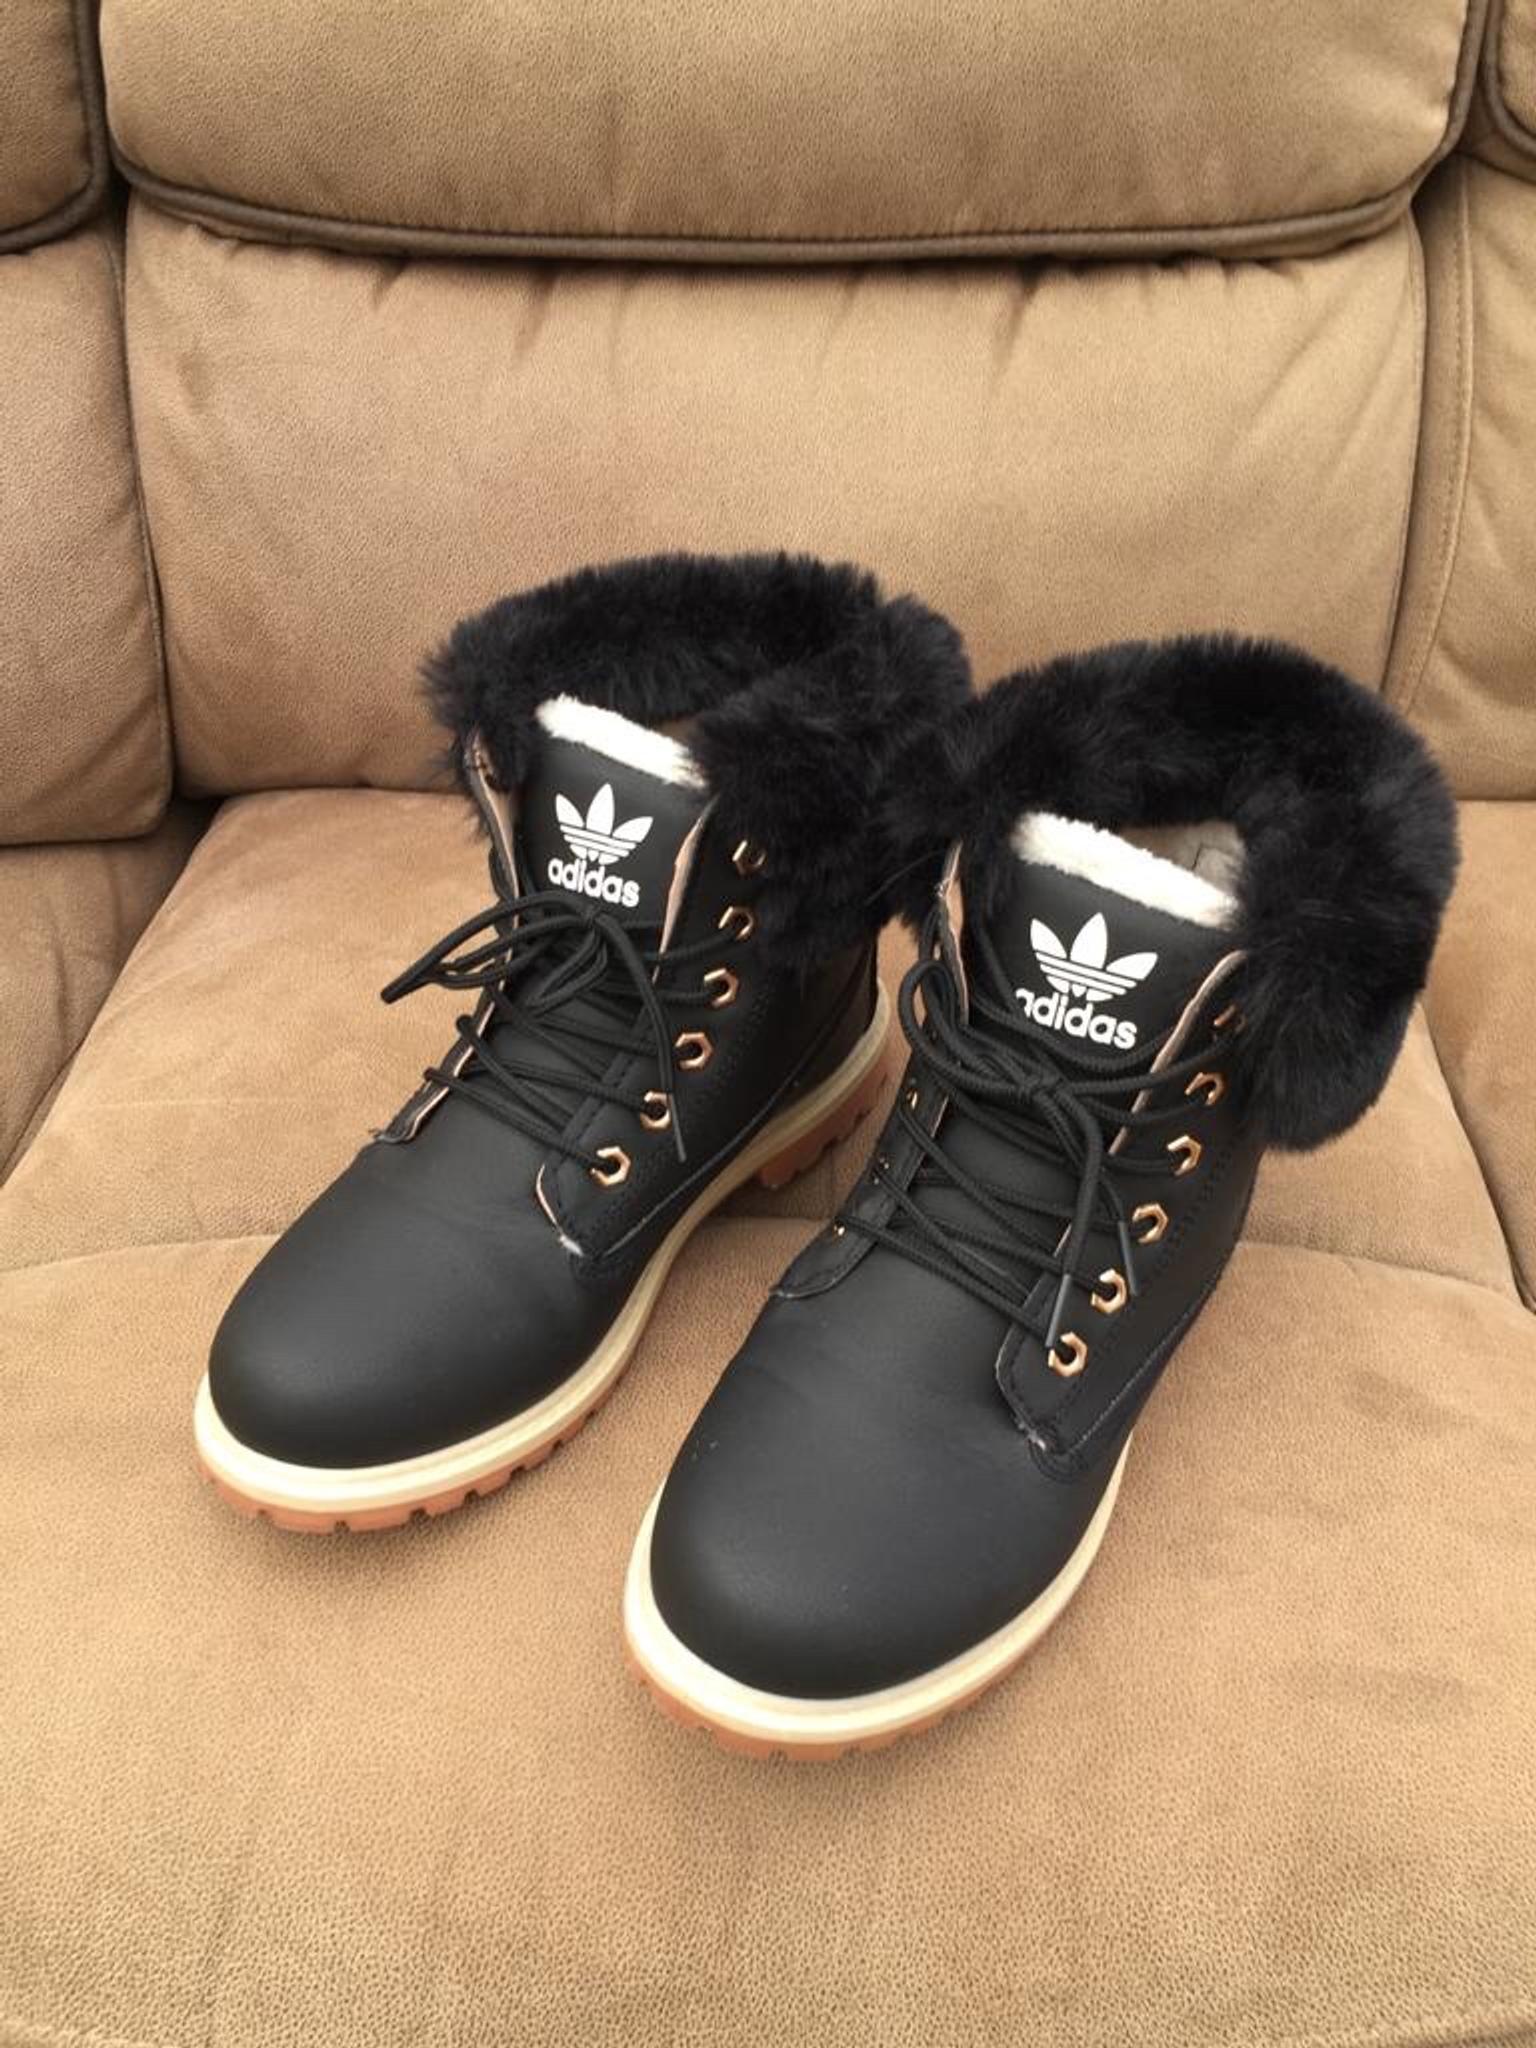 ladies adidas boots with fur